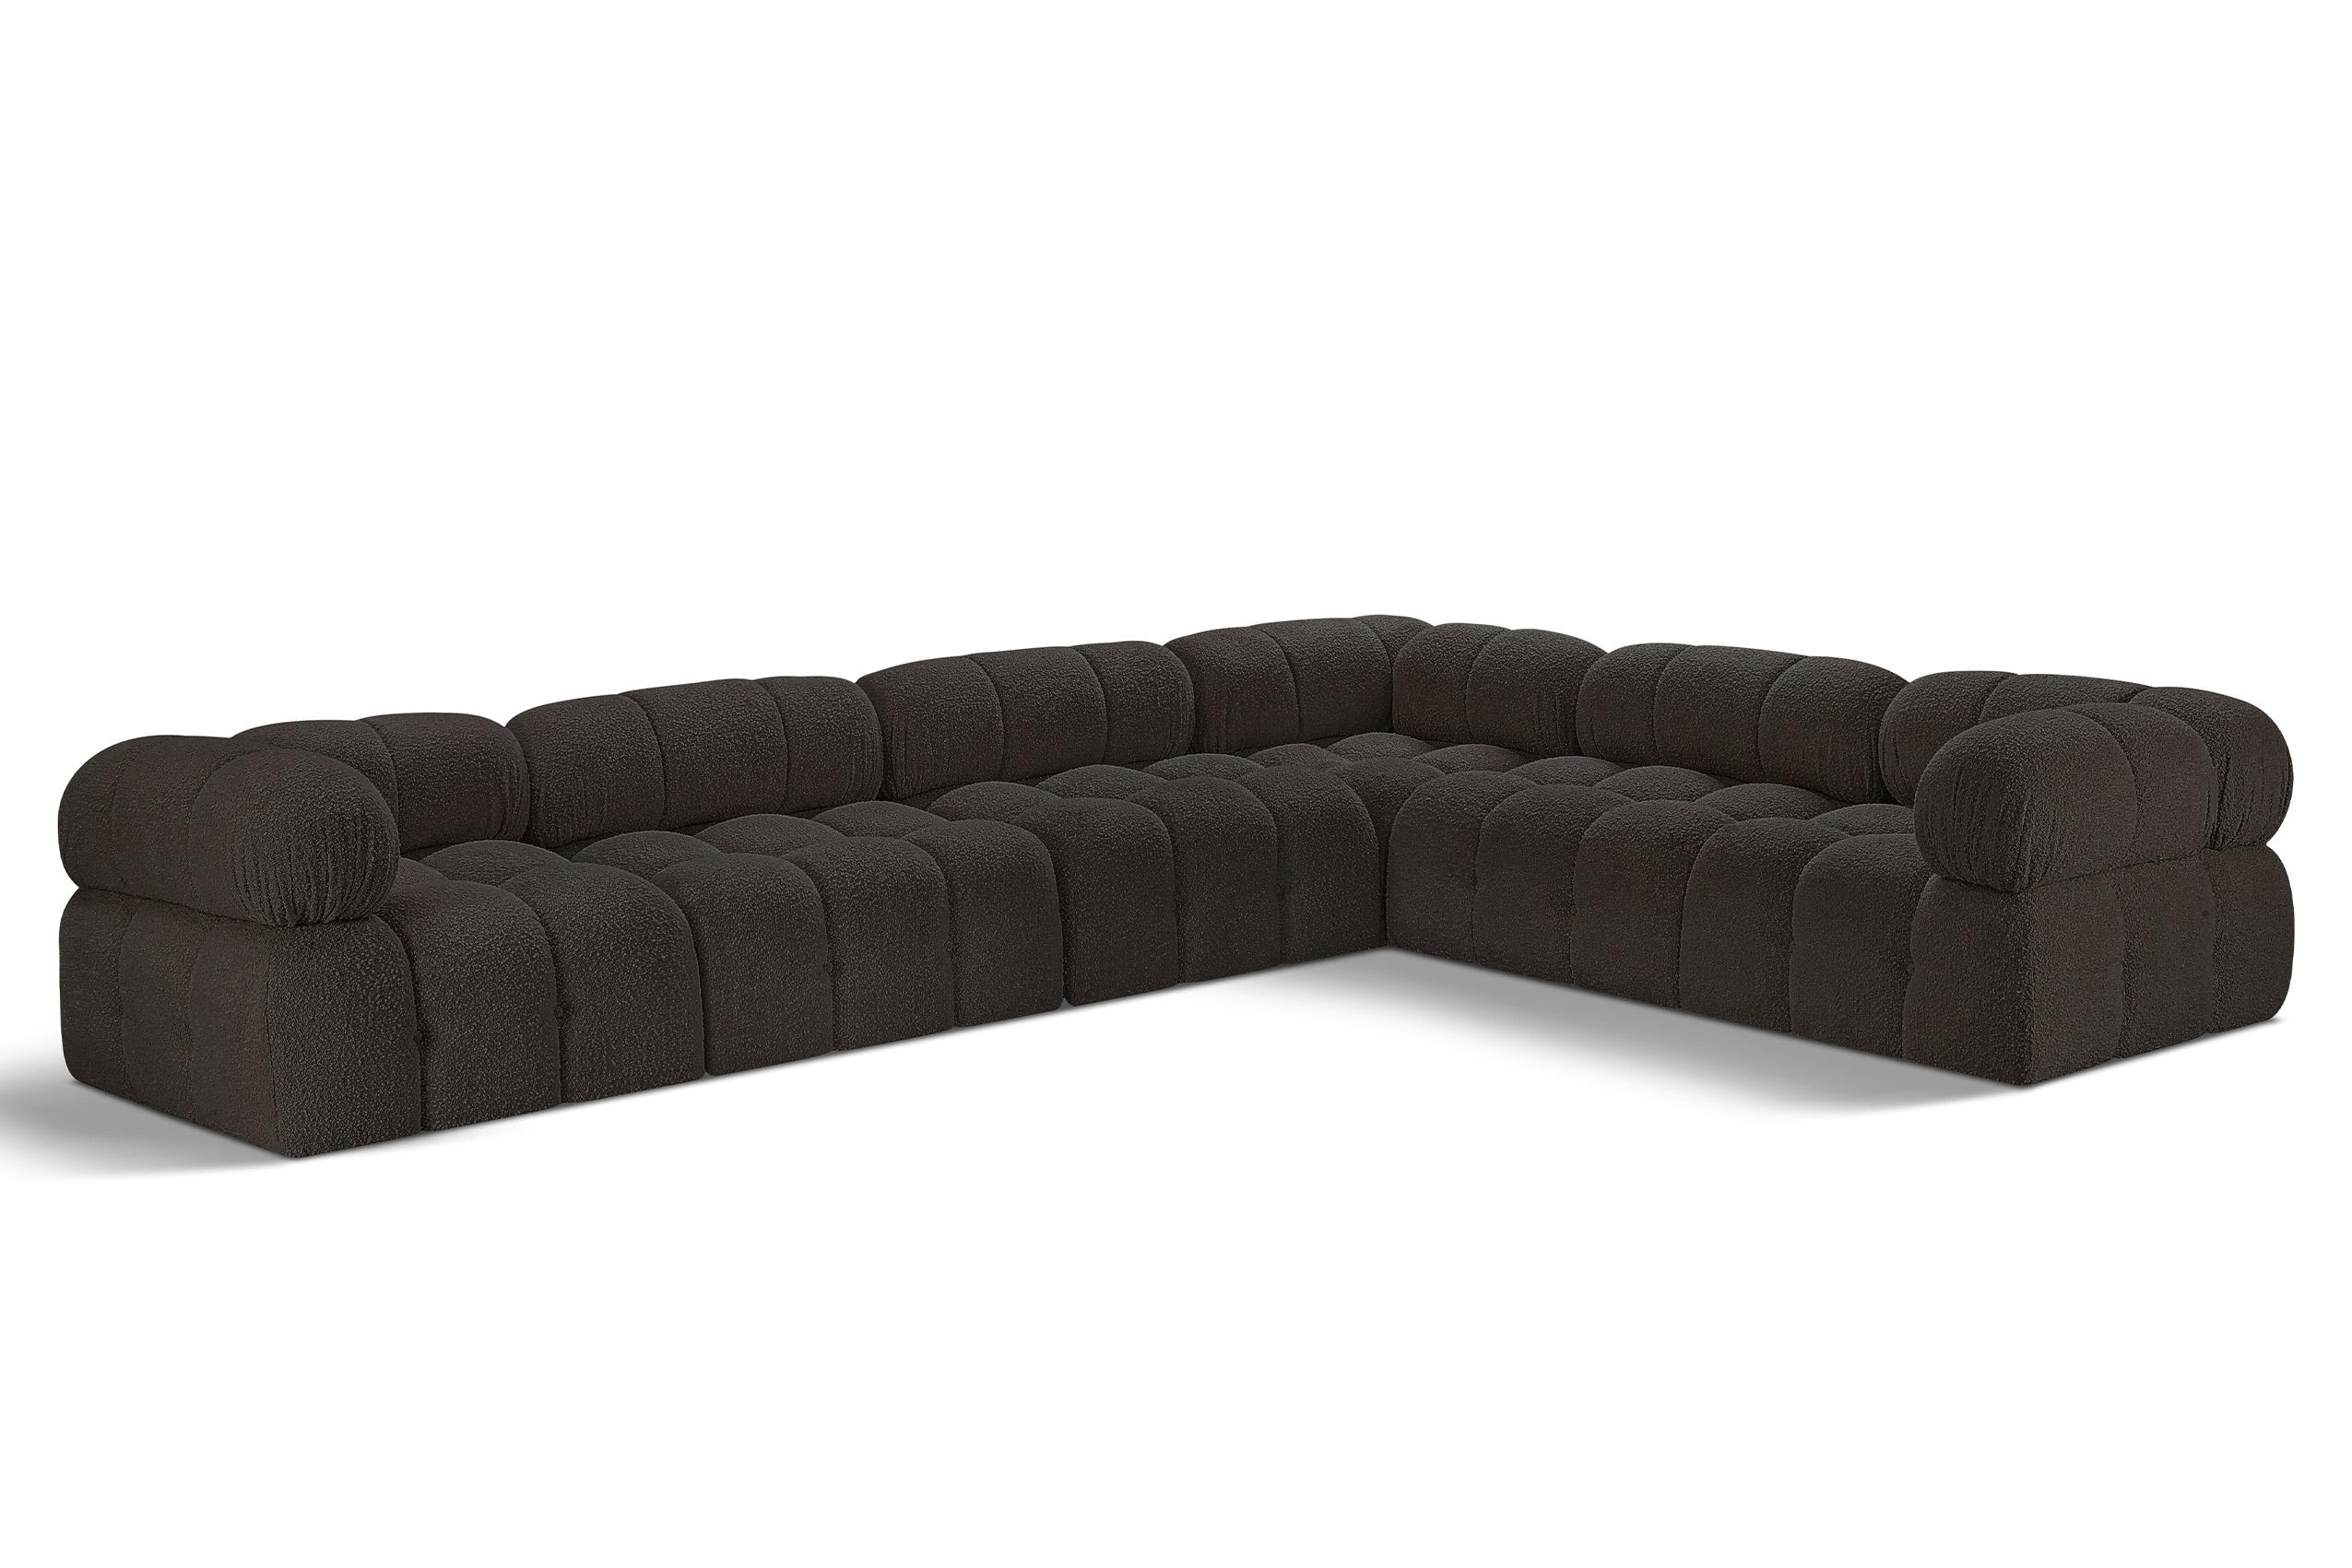 Contemporary, Modern Modular Sectional AMES 611Brown-Sec6F 611Brown-Sec6F in Brown 